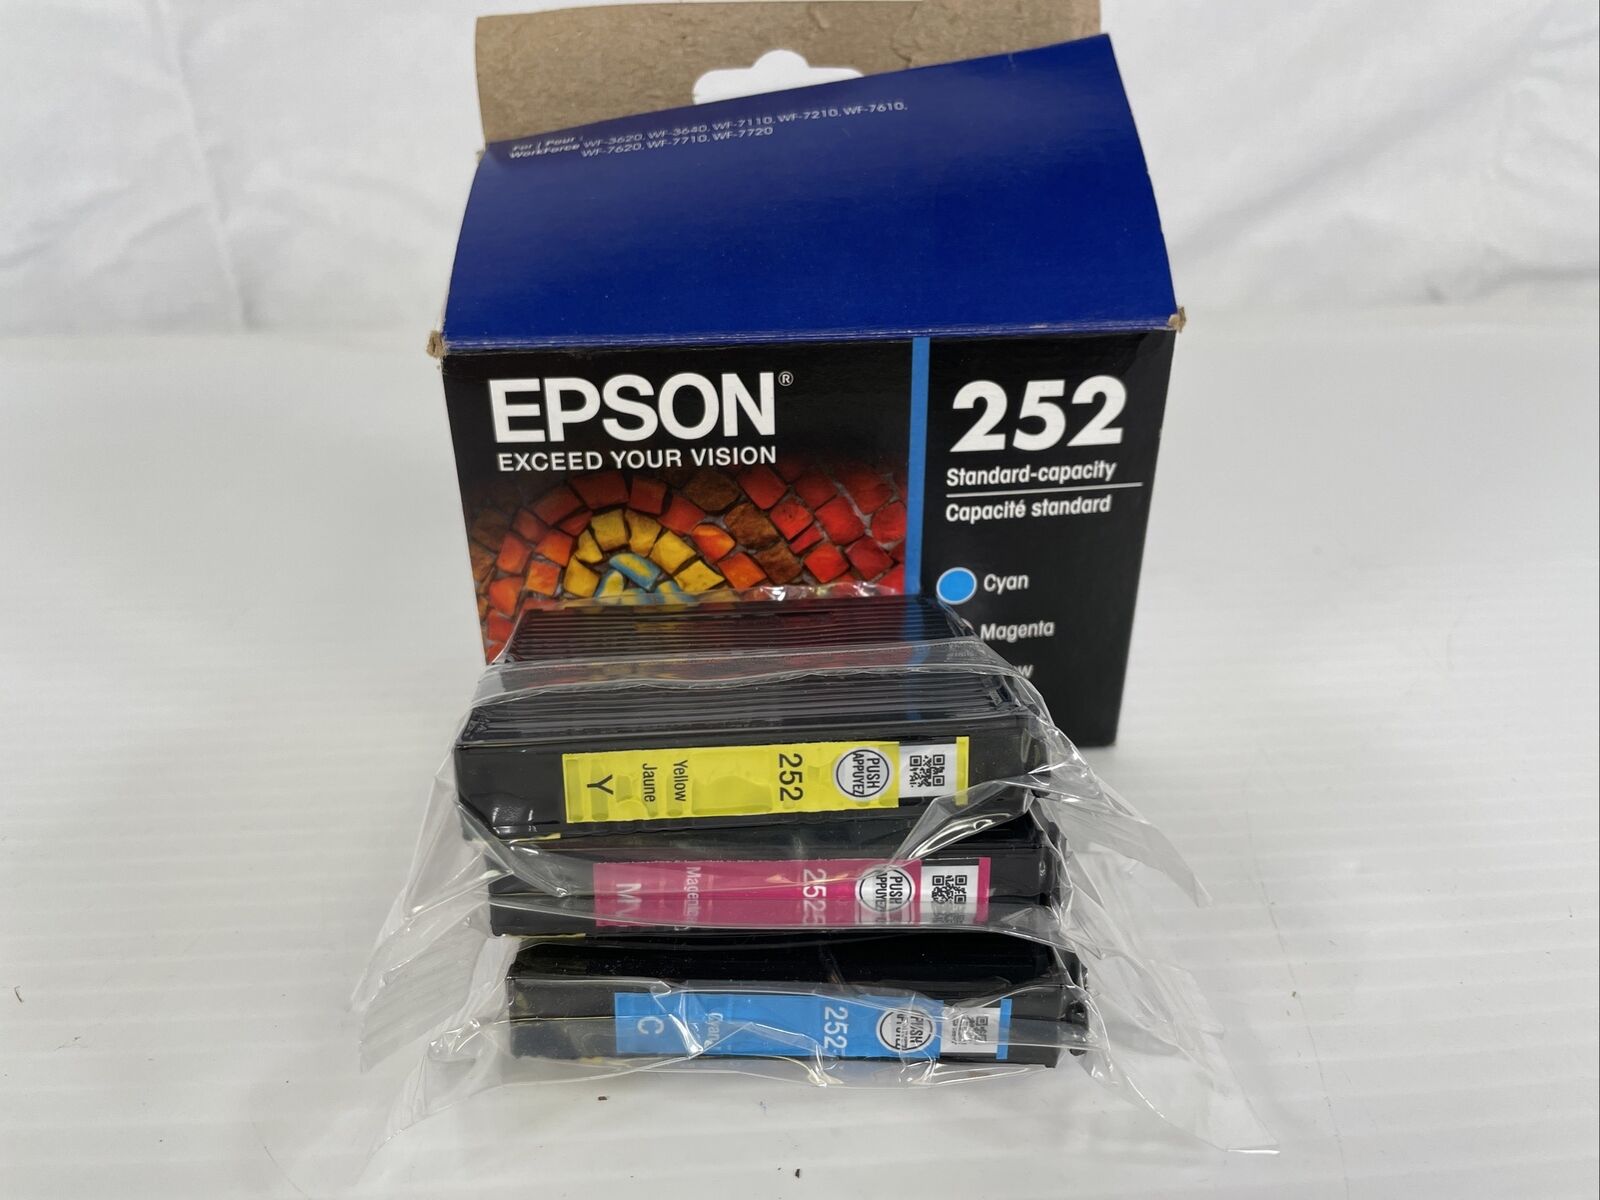 NEW EPSON  COLORS  Ink Cartridges C Y M - Never opened.